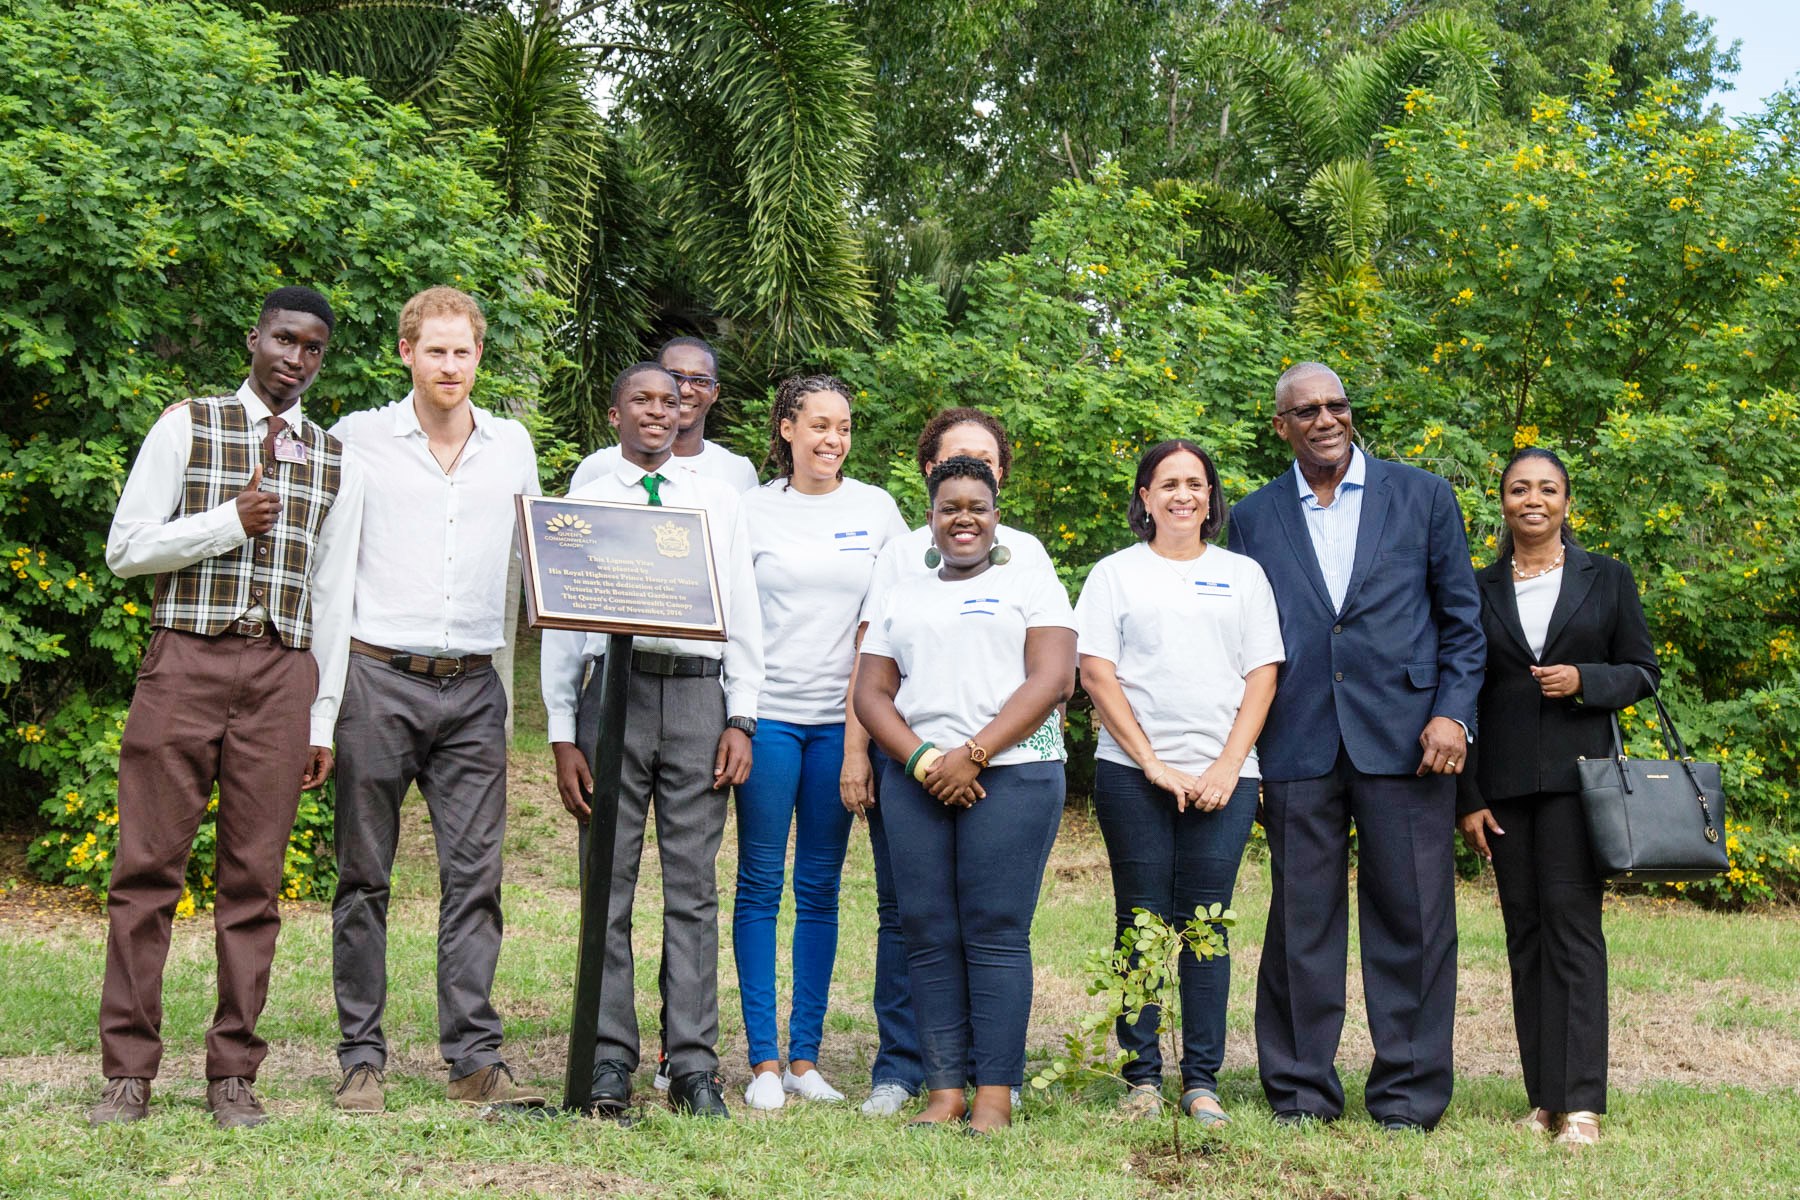 The Department of Environment team pictured with Prince Harry planting a tree, who visited Antigua and Barbuda in November 2016 to celebrate the island's 35th anniversary since independence. Photo: Justin Peters